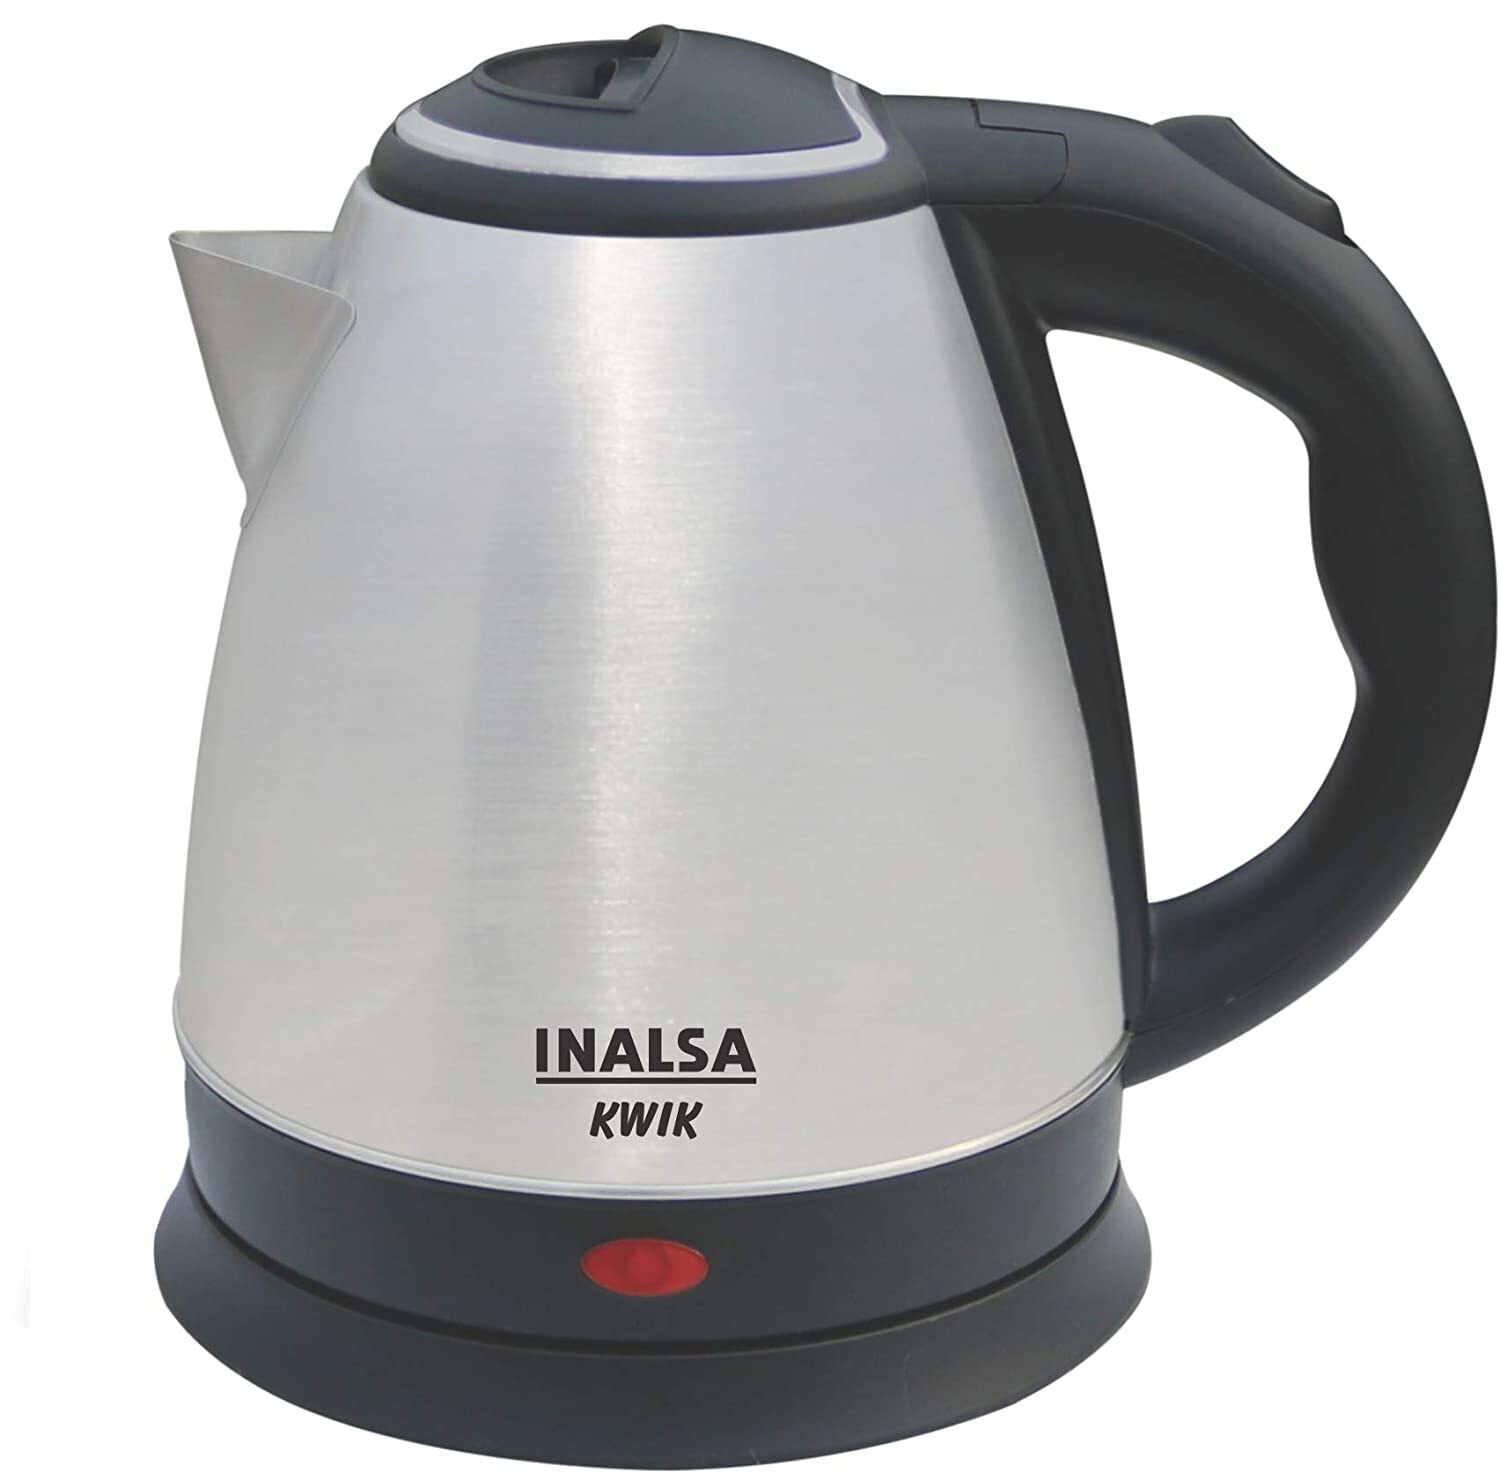 Inalsa Kwik 1.8 Electric Kettle Online On Dillimall.Com